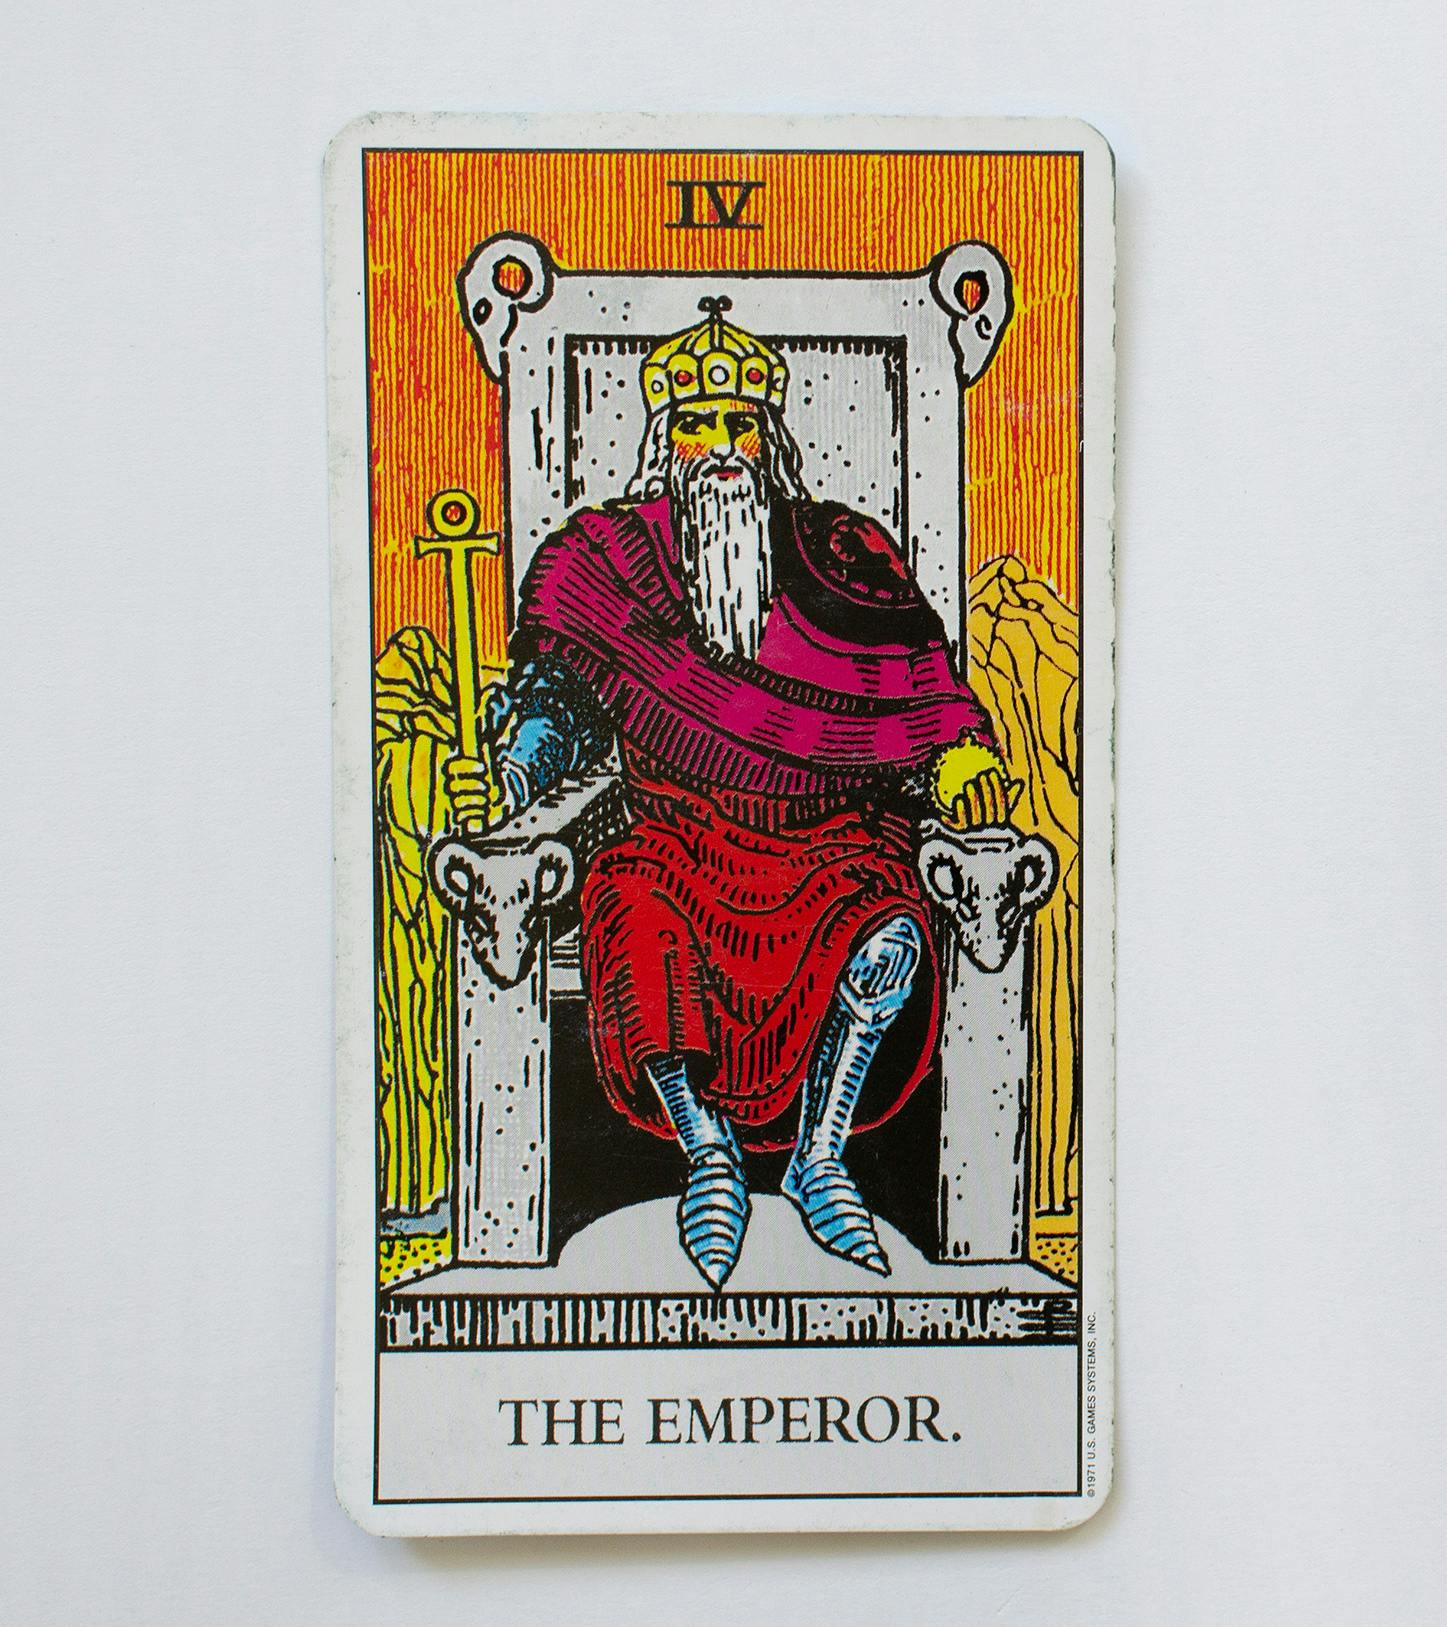 The emperor card. Features a man sitting in a throne wearing a red cape and holding a scepter.